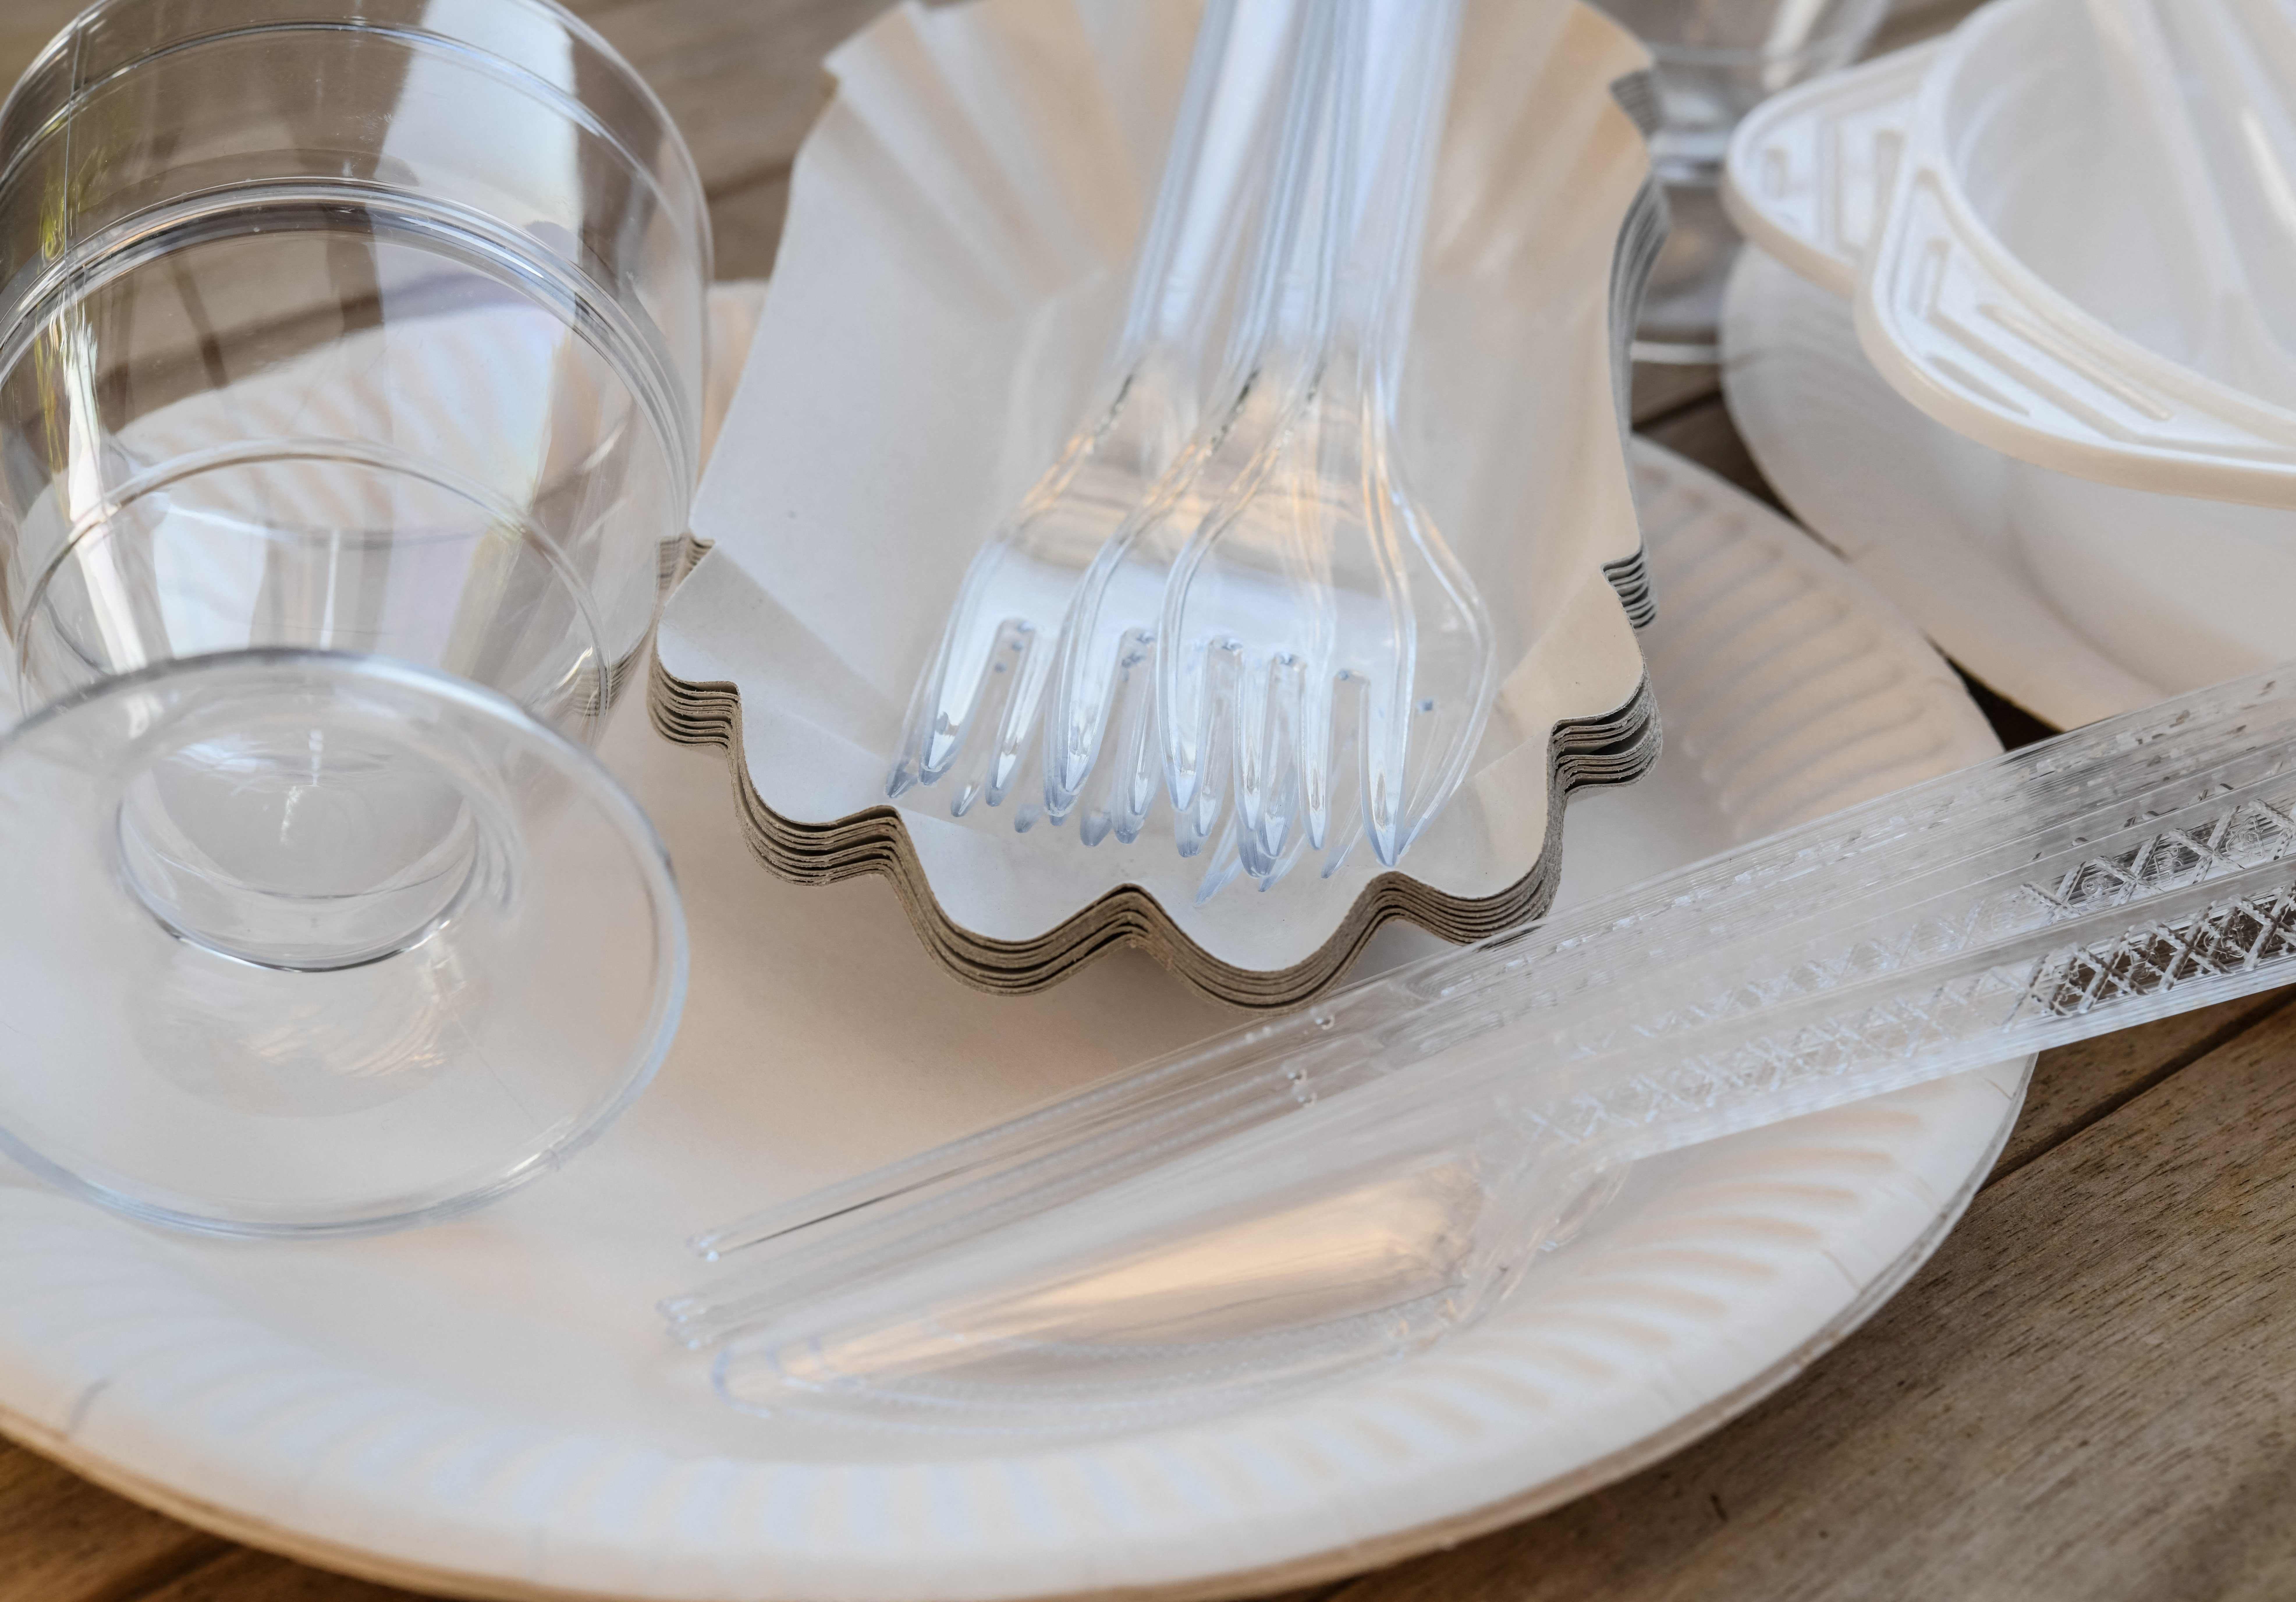 Plates, cutlery, cups and cotton swabs are among the single-use plastics banned by the European directive